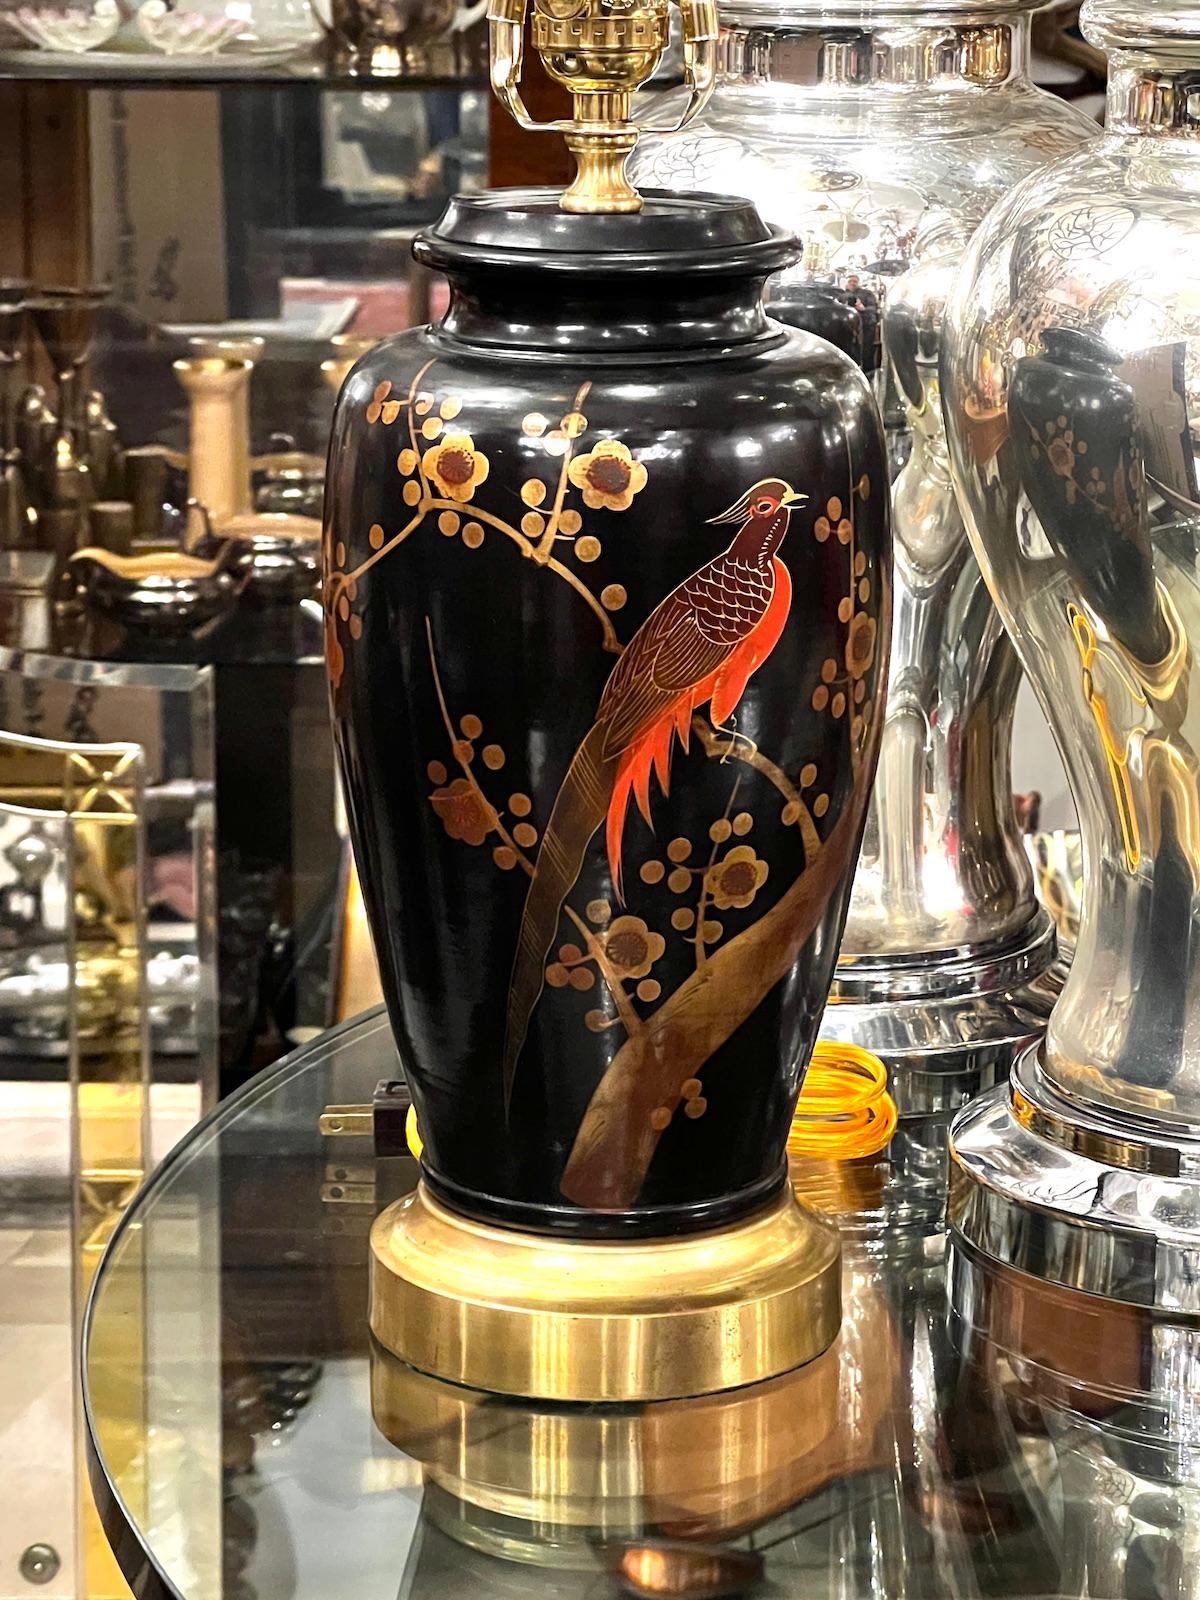 A circa 1920s Japanese lacquered table lamp with gilt details.

Measurements:
Height of body: 13